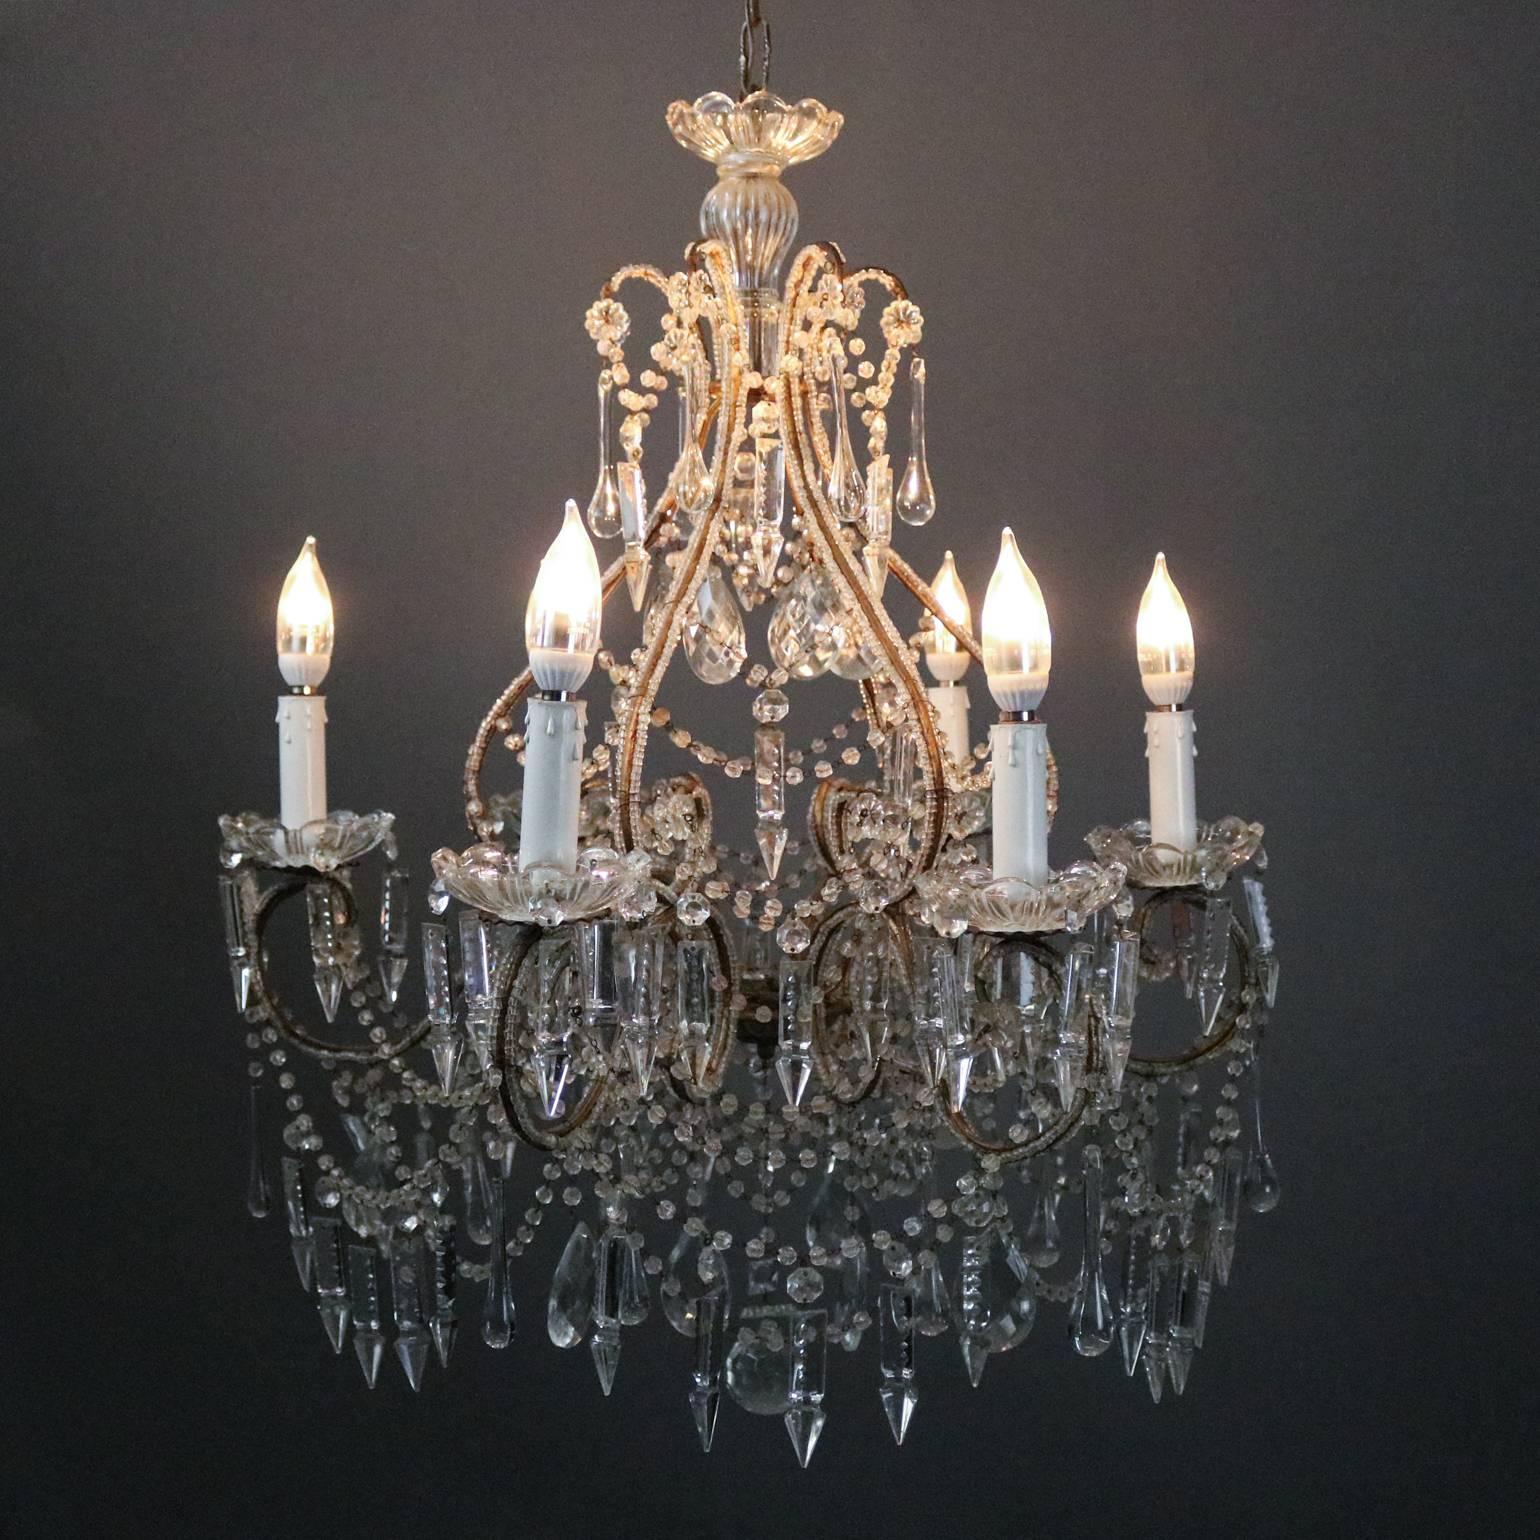 Antique French style six-light chandelier features curvilinear scrolled bronze frame decorated overall with strung and drop cut crystals, newly re-wired, circa 1930

Measures: 44